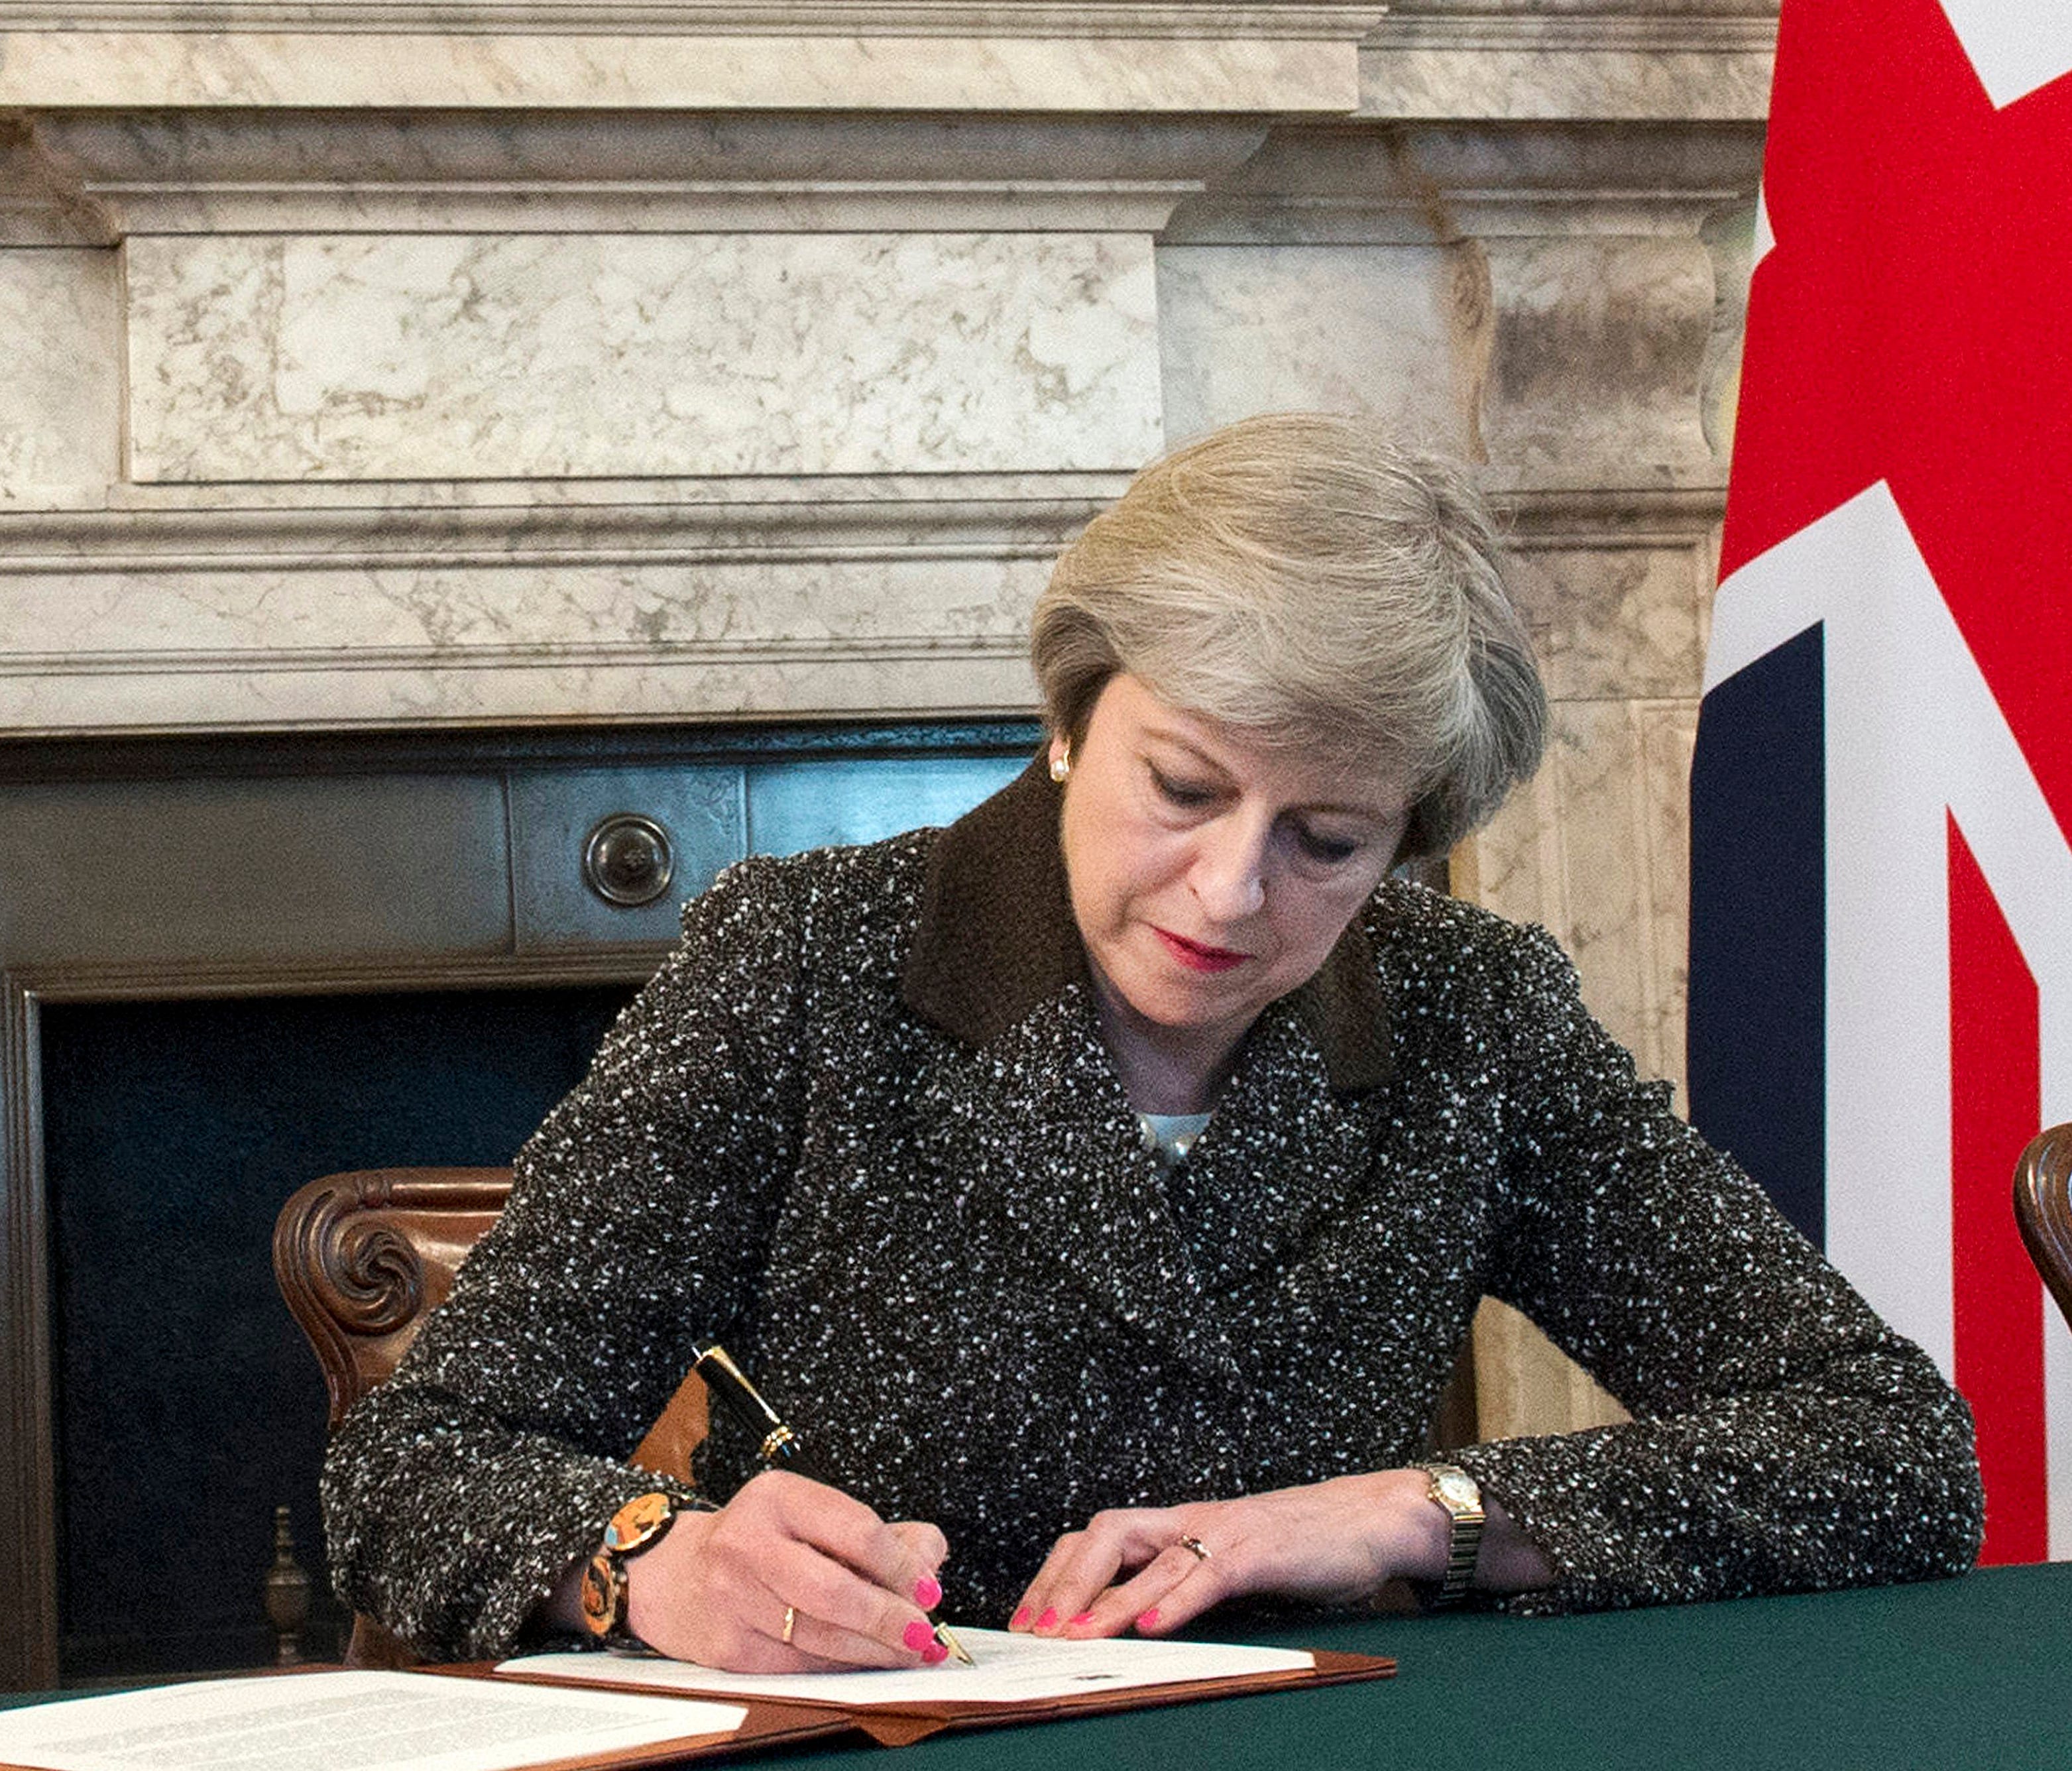 A handout photo made available by 10 Downing Street on March 29, 2017 shows British Prime Minister Theresa May signing a letter of notification to the President of the European Council setting out the United Kingdom's intention to withdraw from the E